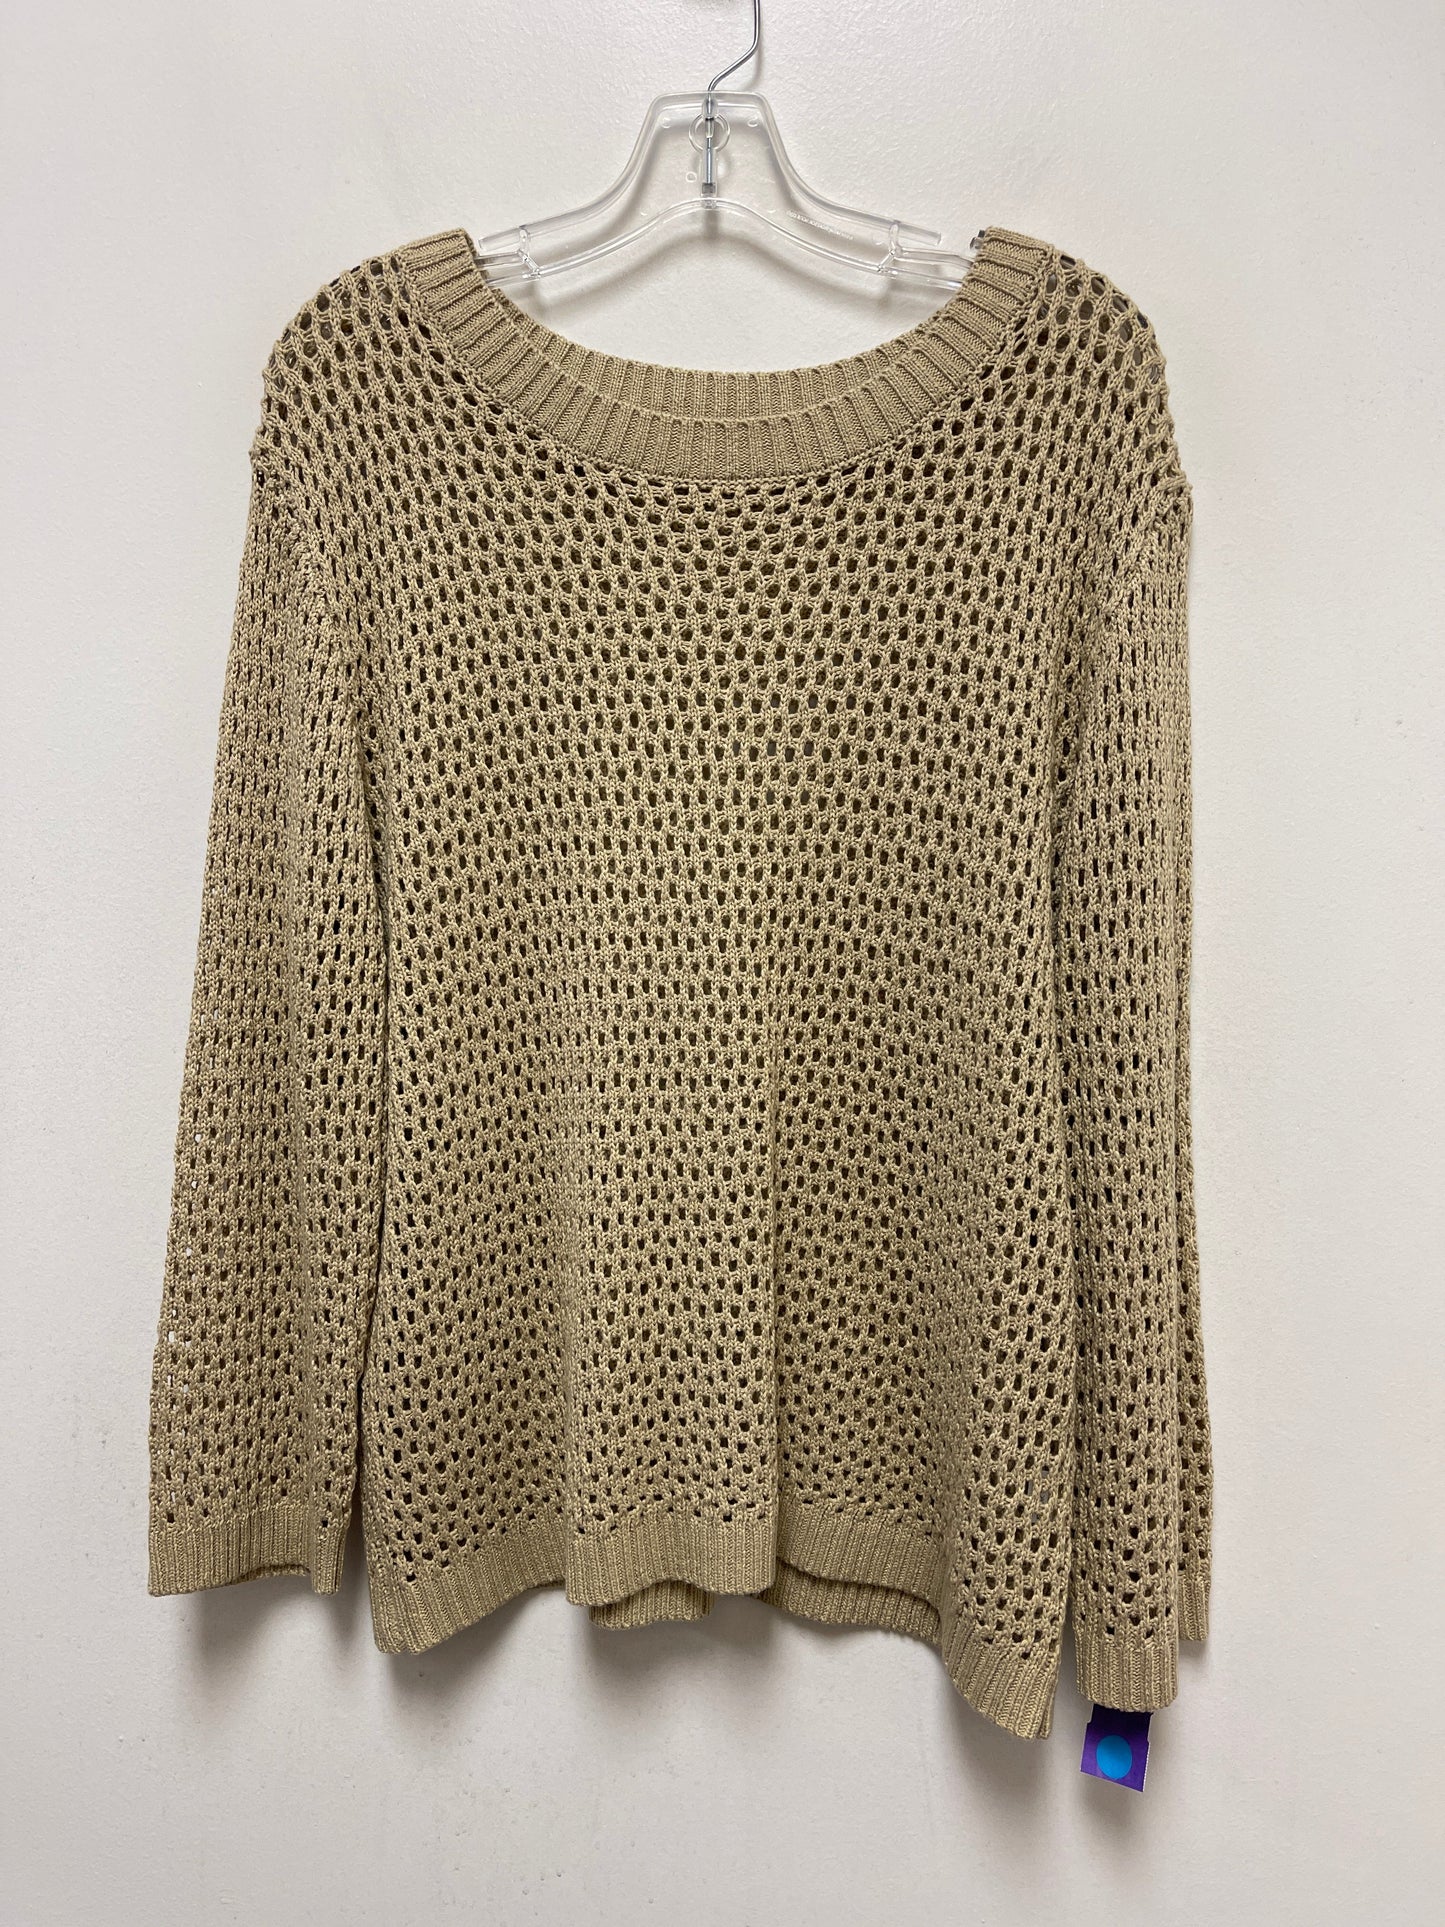 Tan Sweater Clothes Mentor, Size M